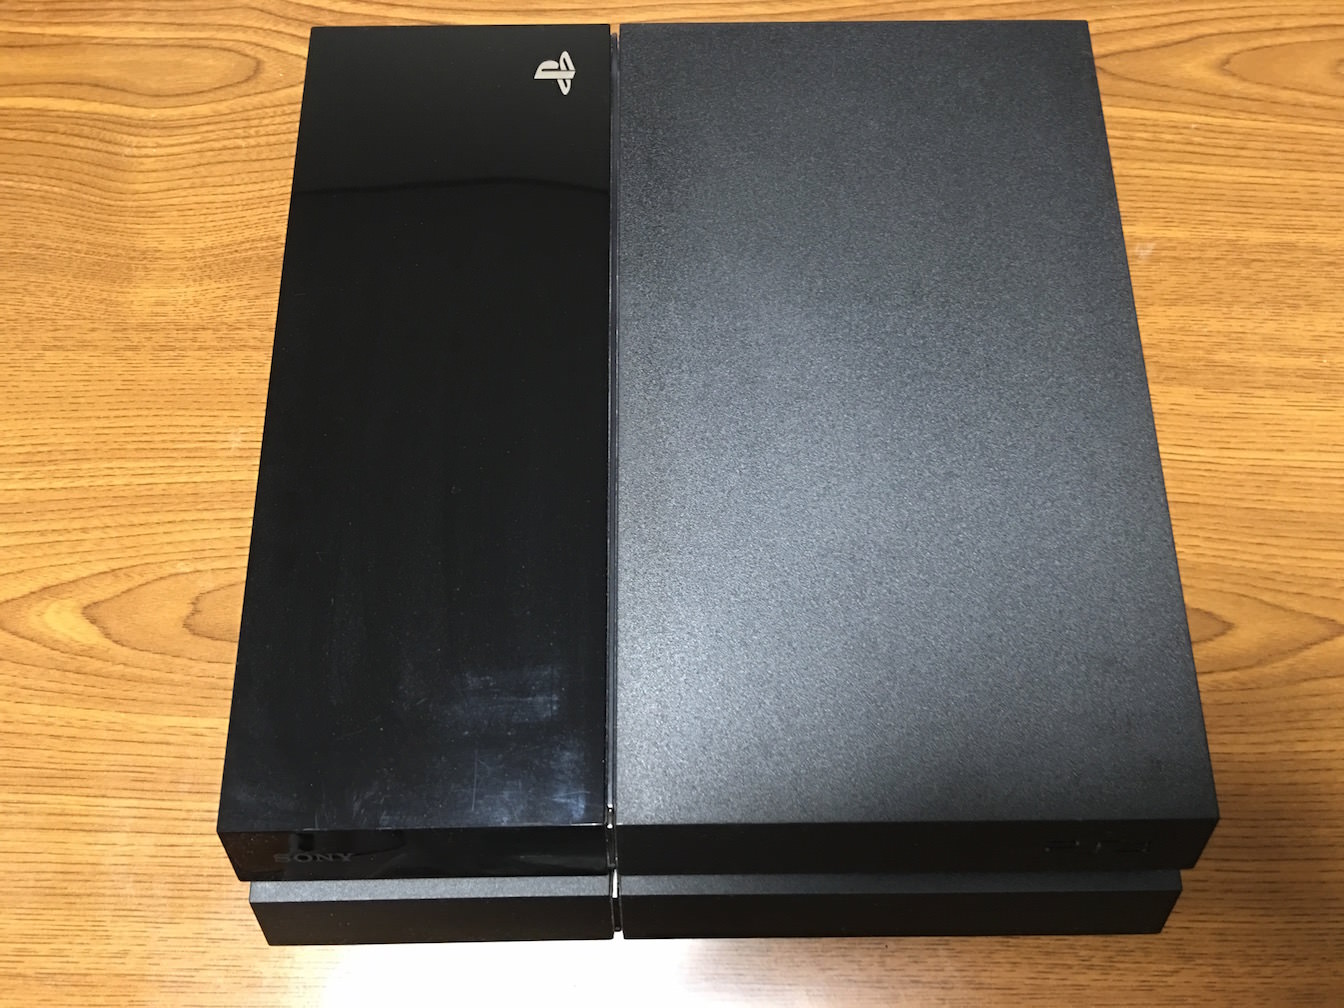 Review of ps4 hddbaycover 5